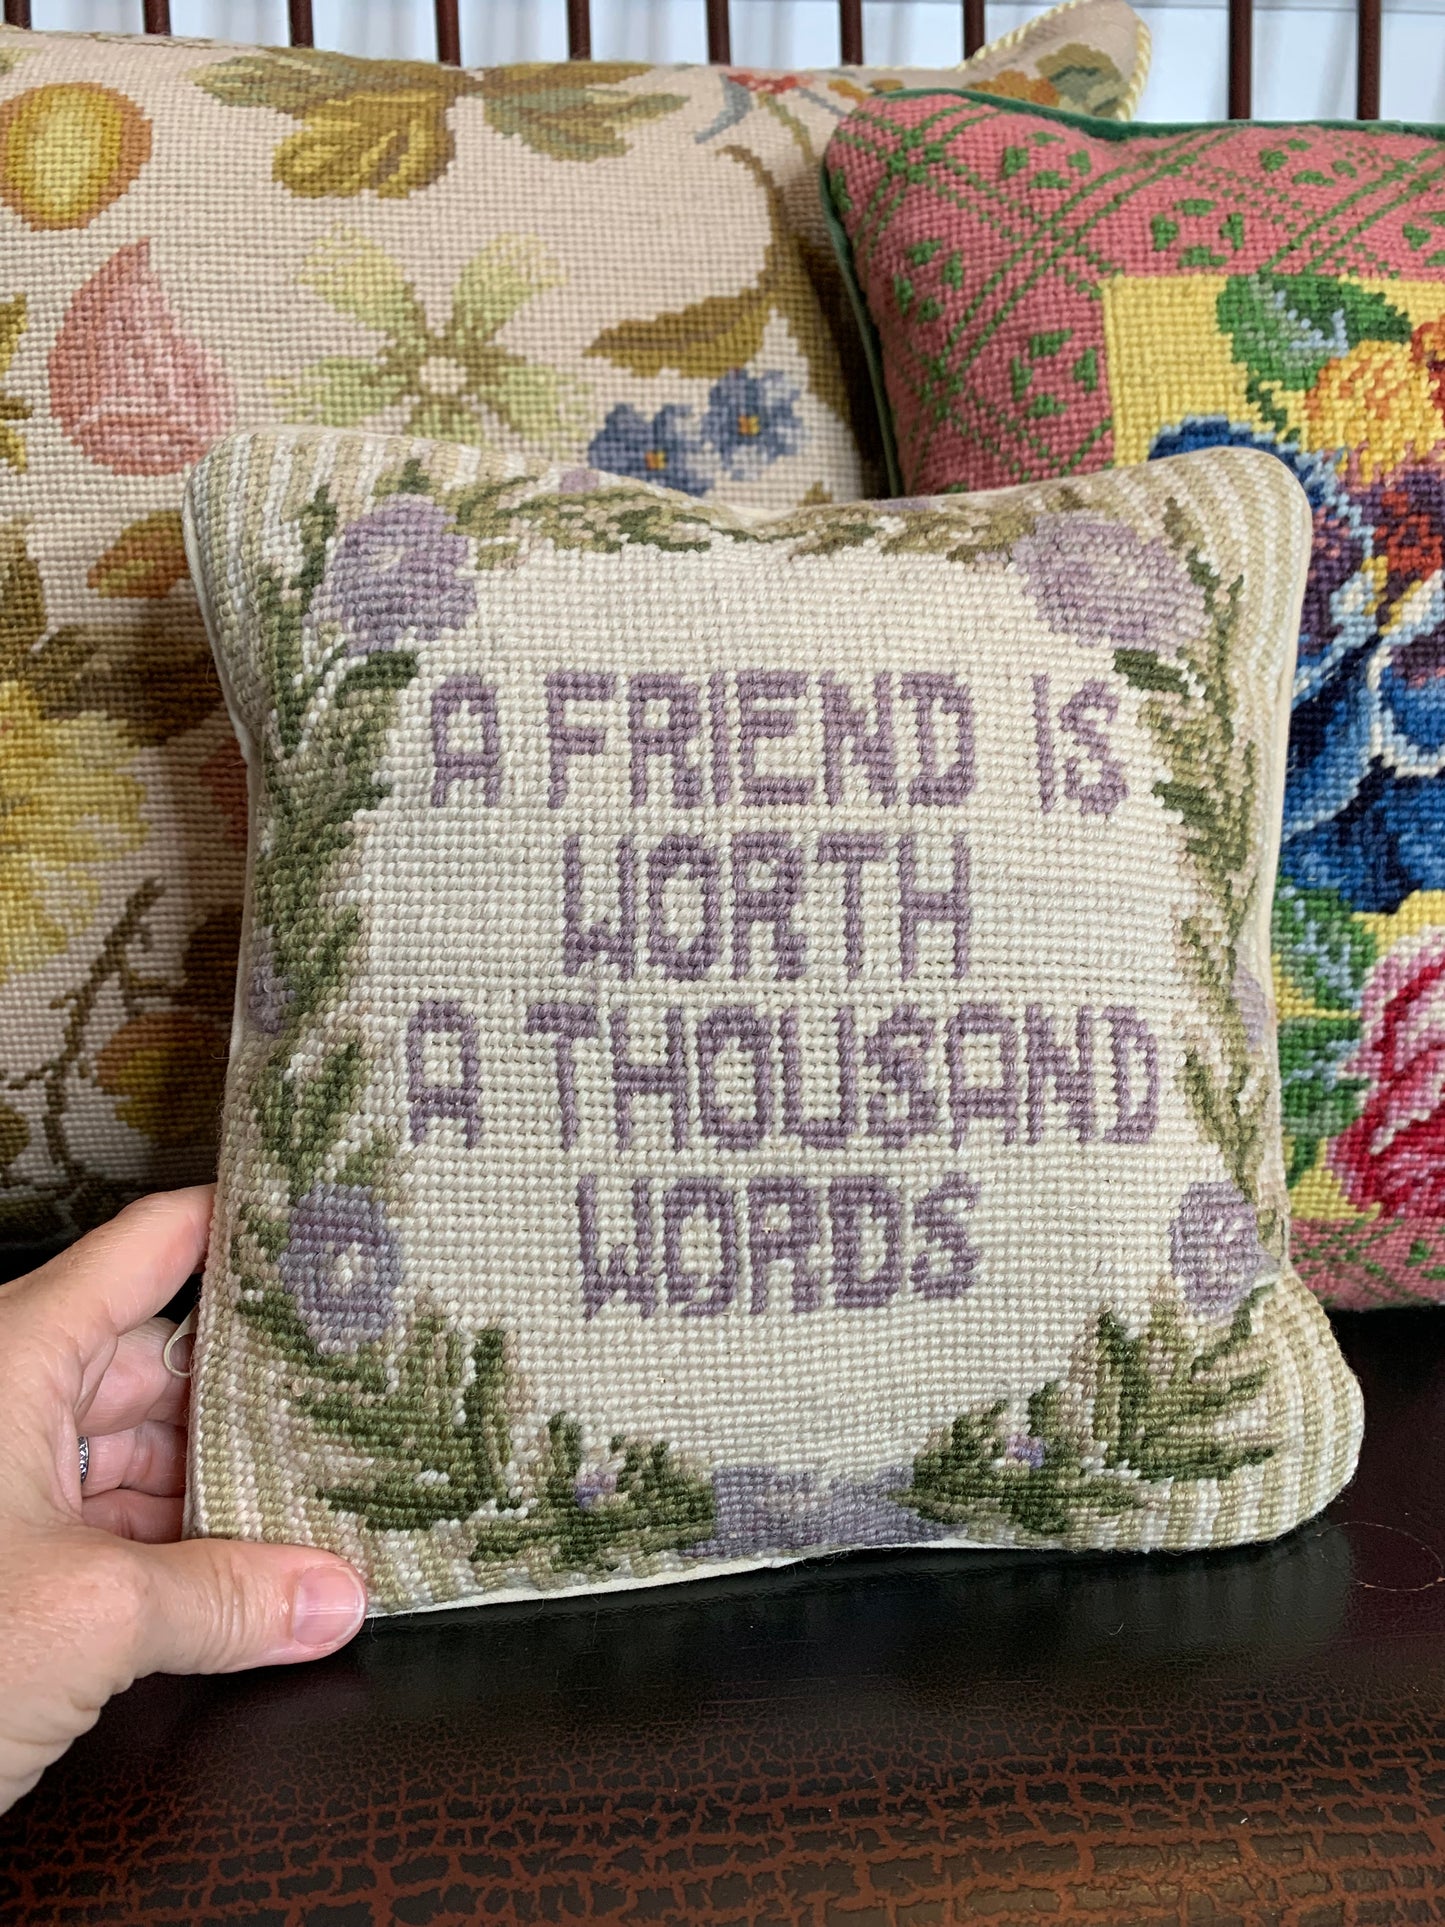 "A Friend is Worth a Thousand Words" Needlepoint Pillow